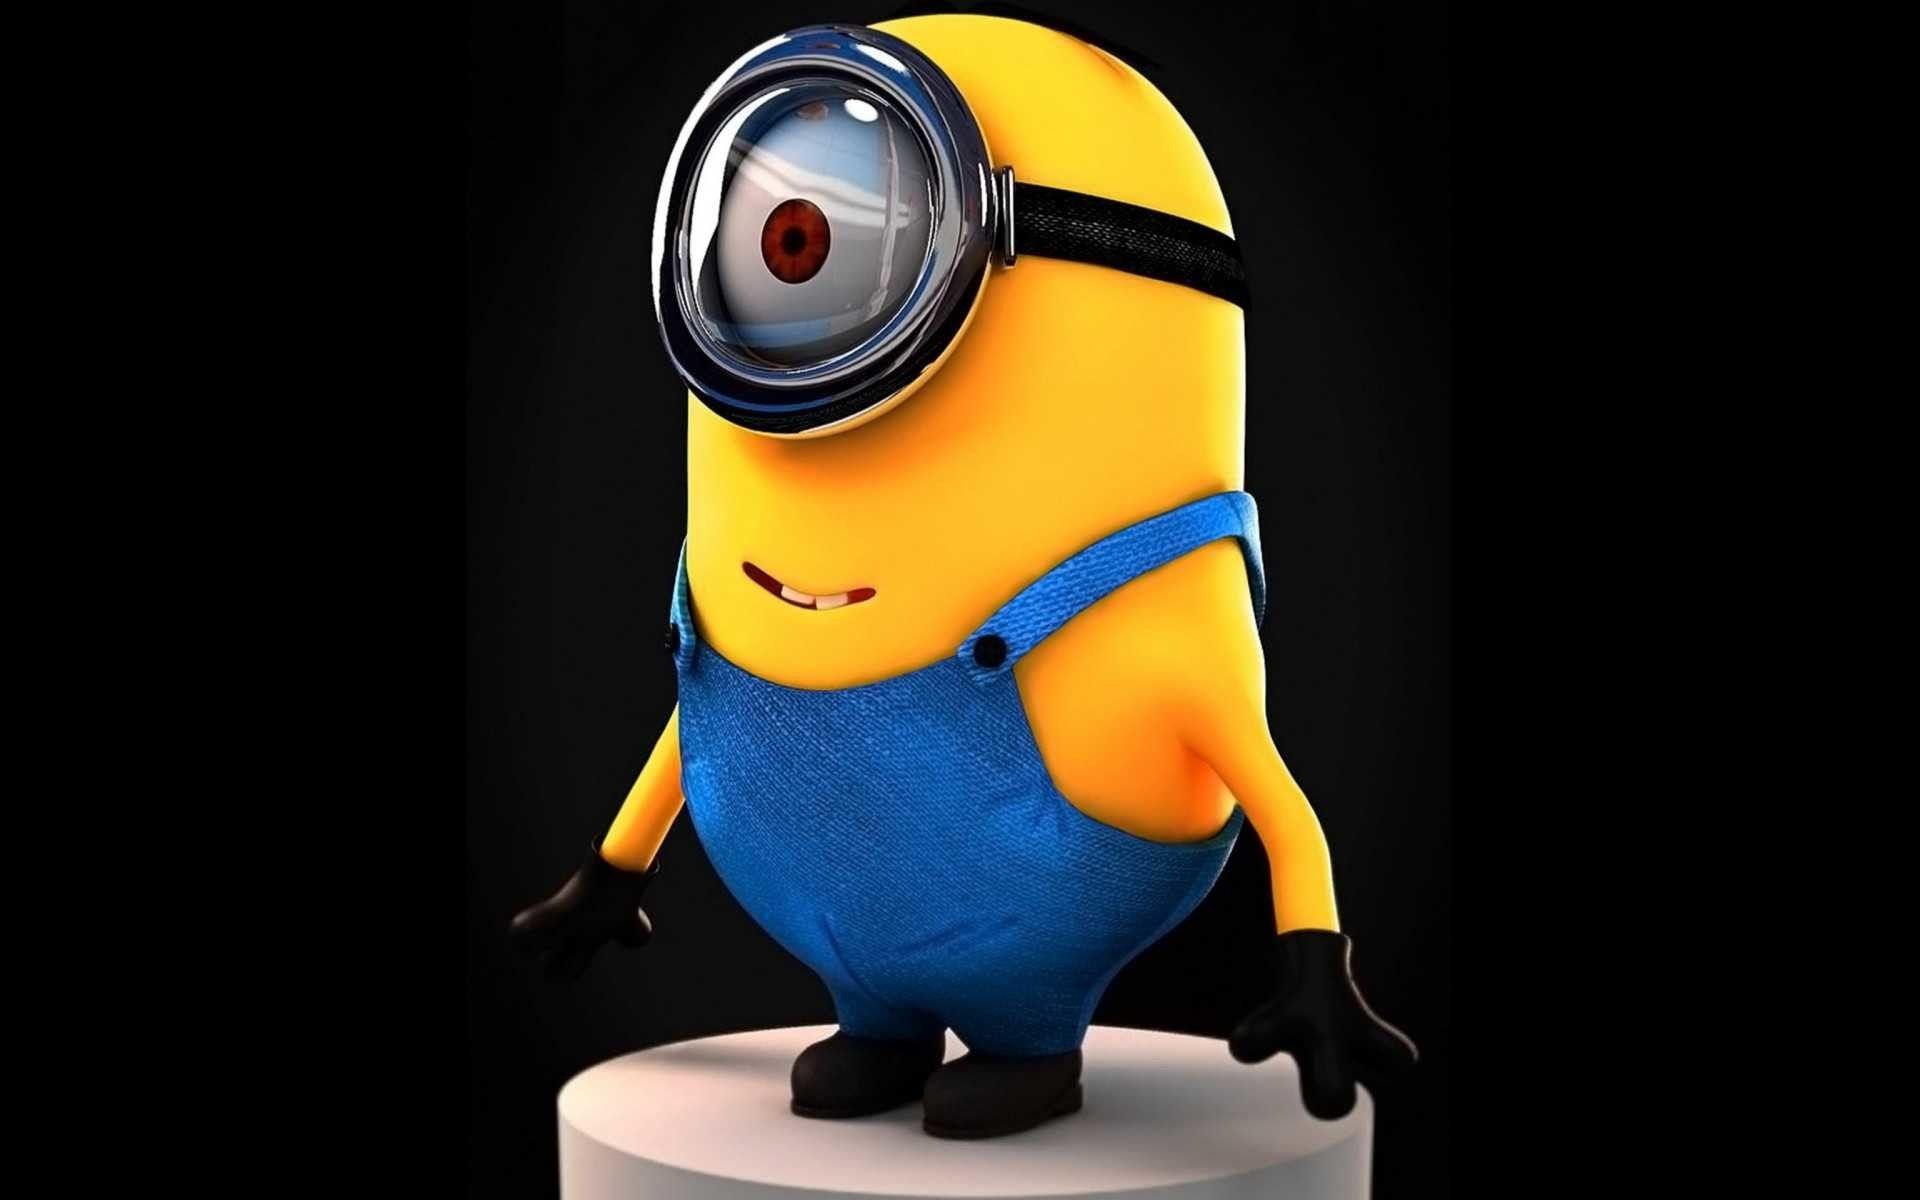 100+] Despicable Me Minion Iphone Wallpapers | Wallpapers.com